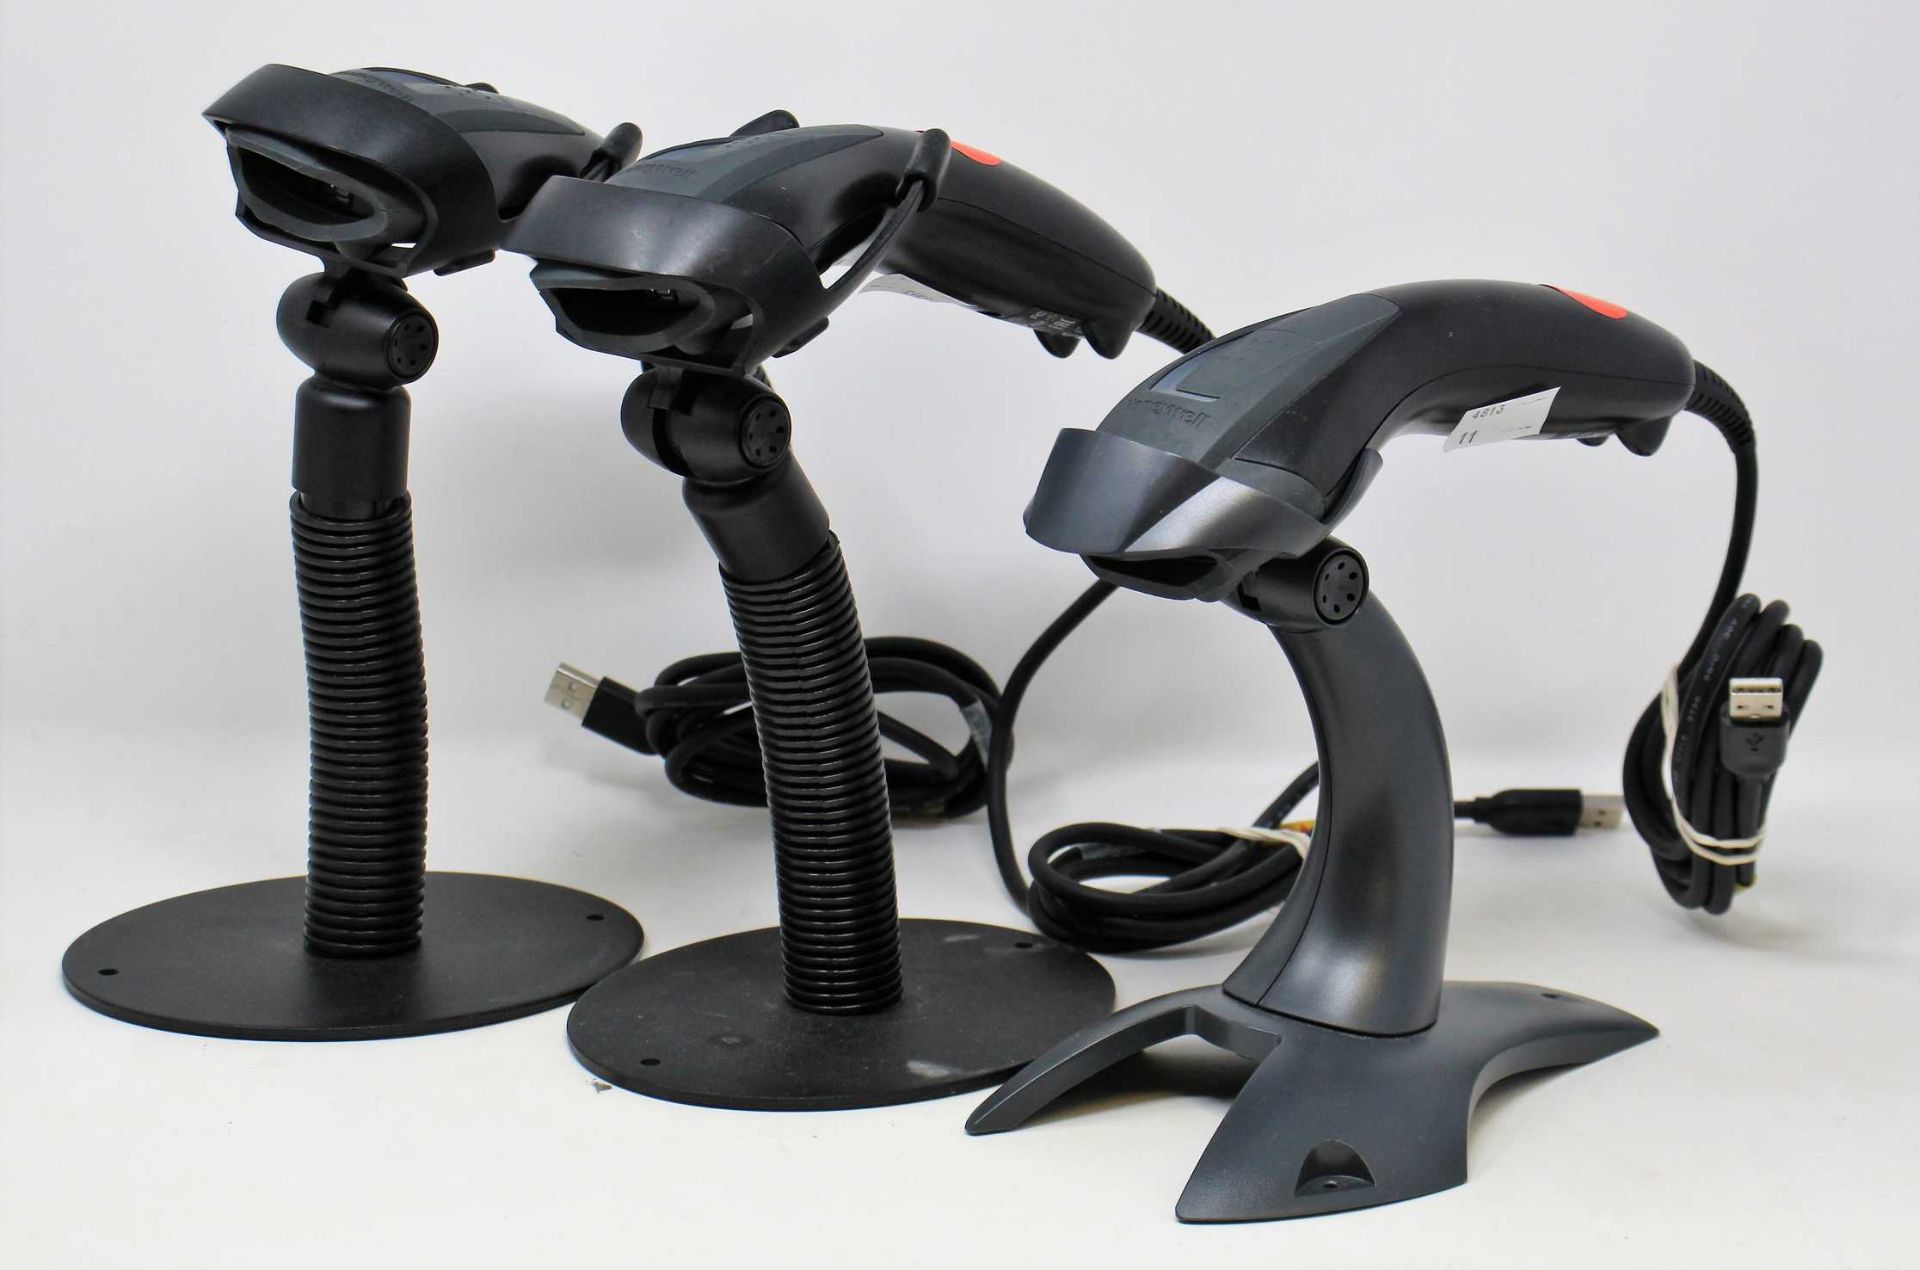 Three pre-owned Honeywell 1400g USB Barcode Scanners with stands.